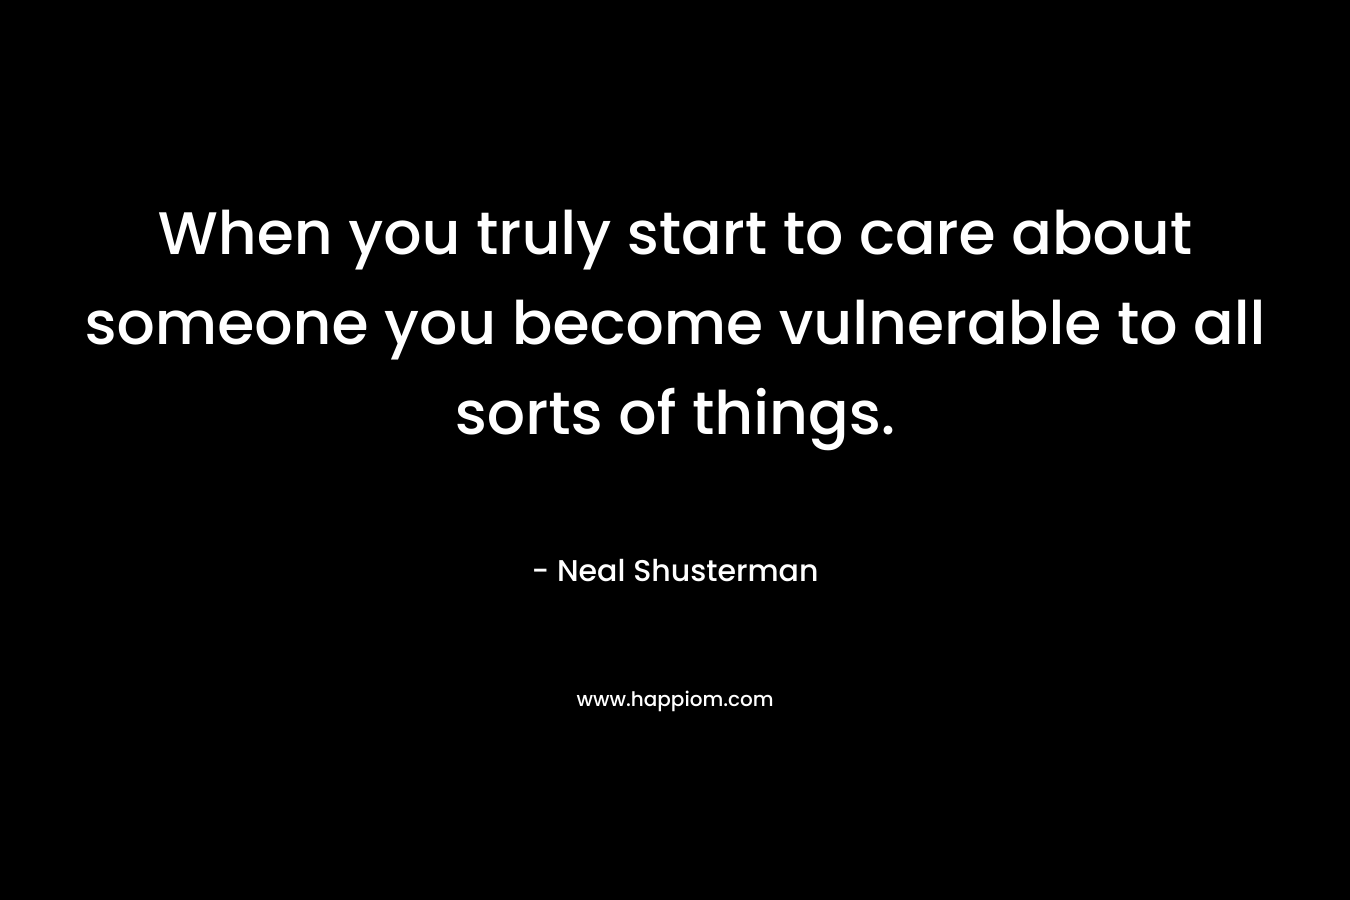 When you truly start to care about someone you become vulnerable to all sorts of things.